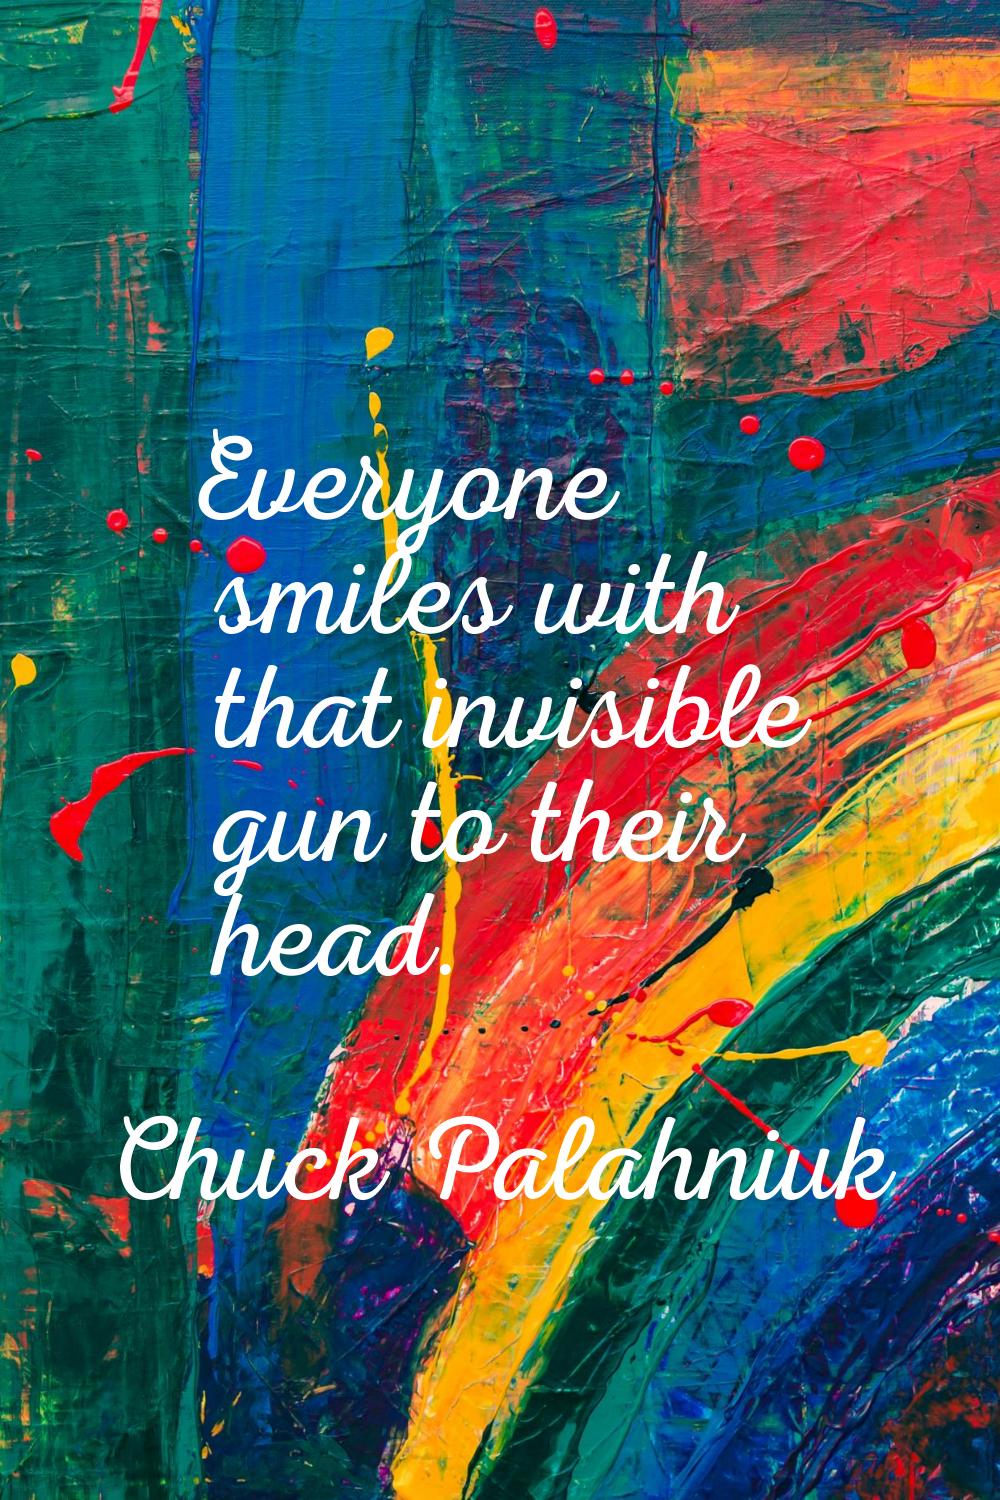 Everyone smiles with that invisible gun to their head.